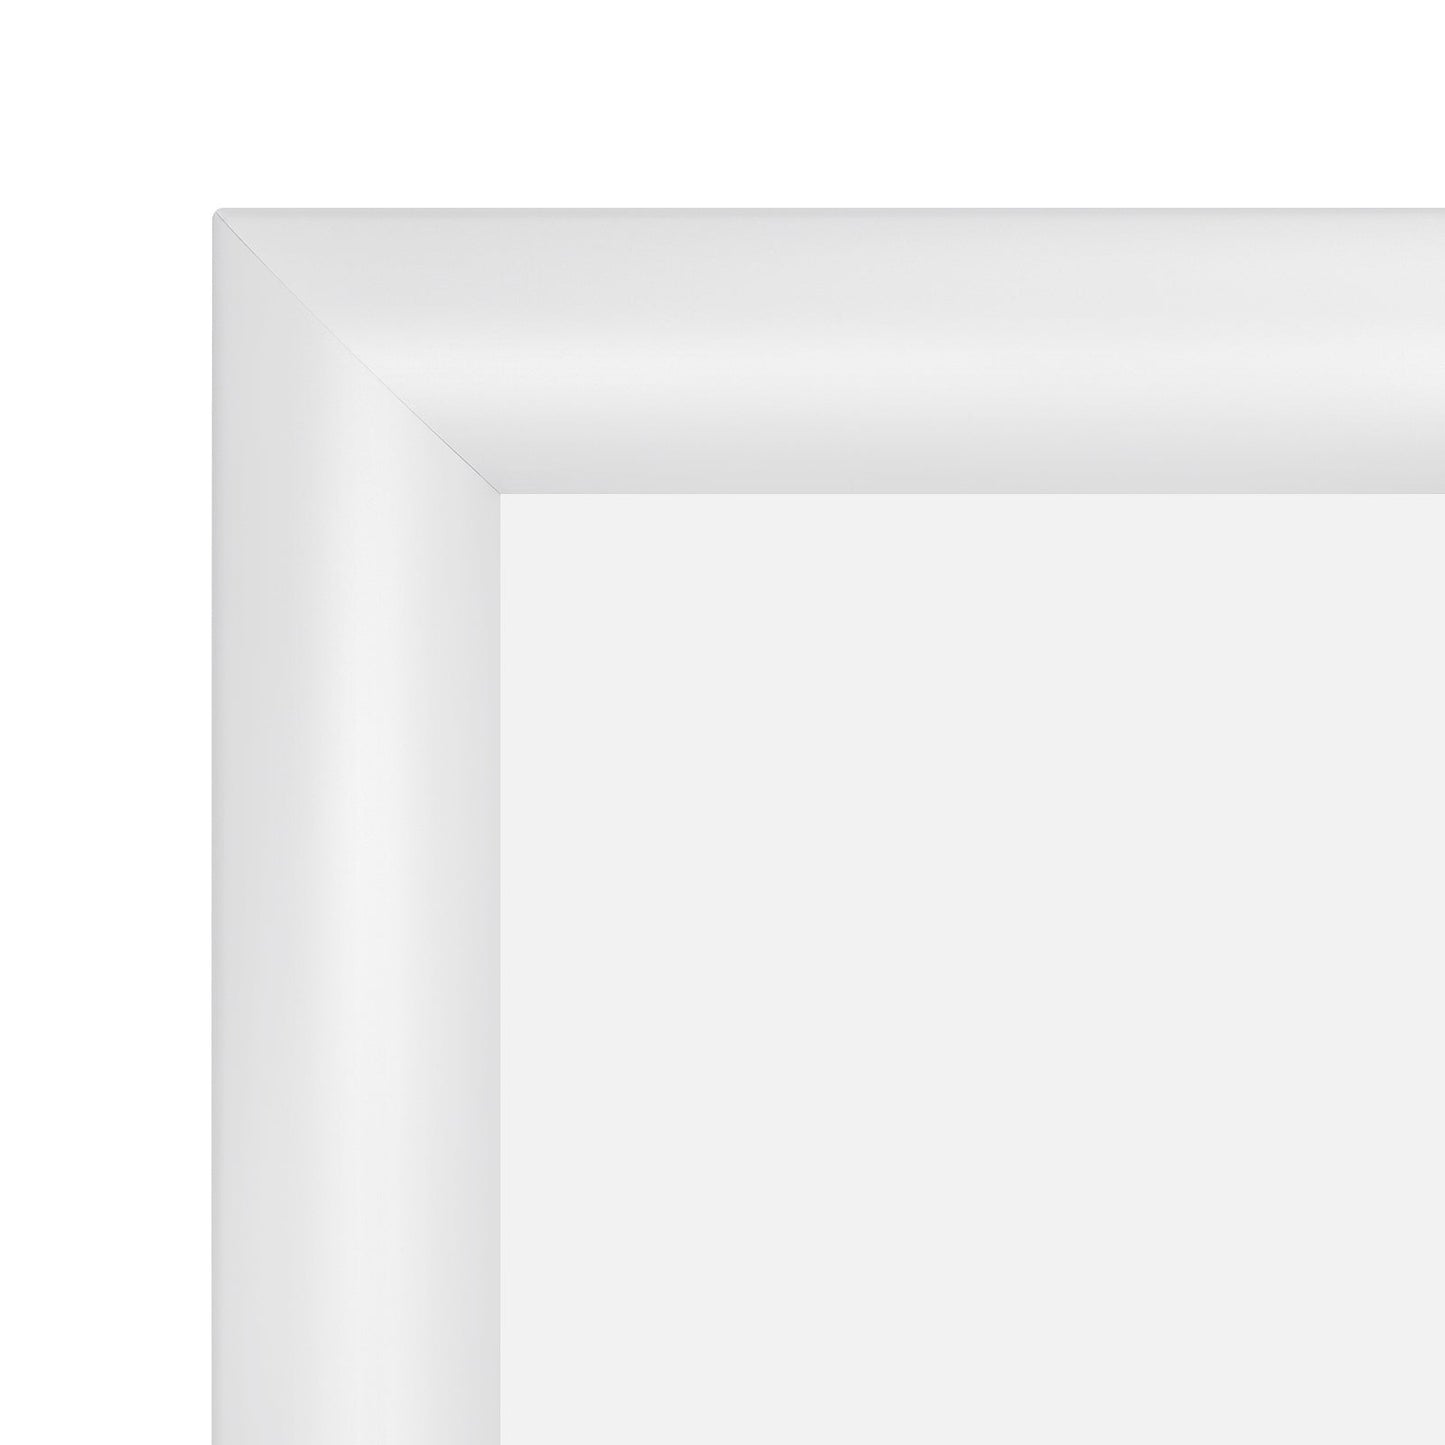 14x22 TRADEframe White Snap Frame 14x22 - 1.2 inch profile - Snap Frames Direct